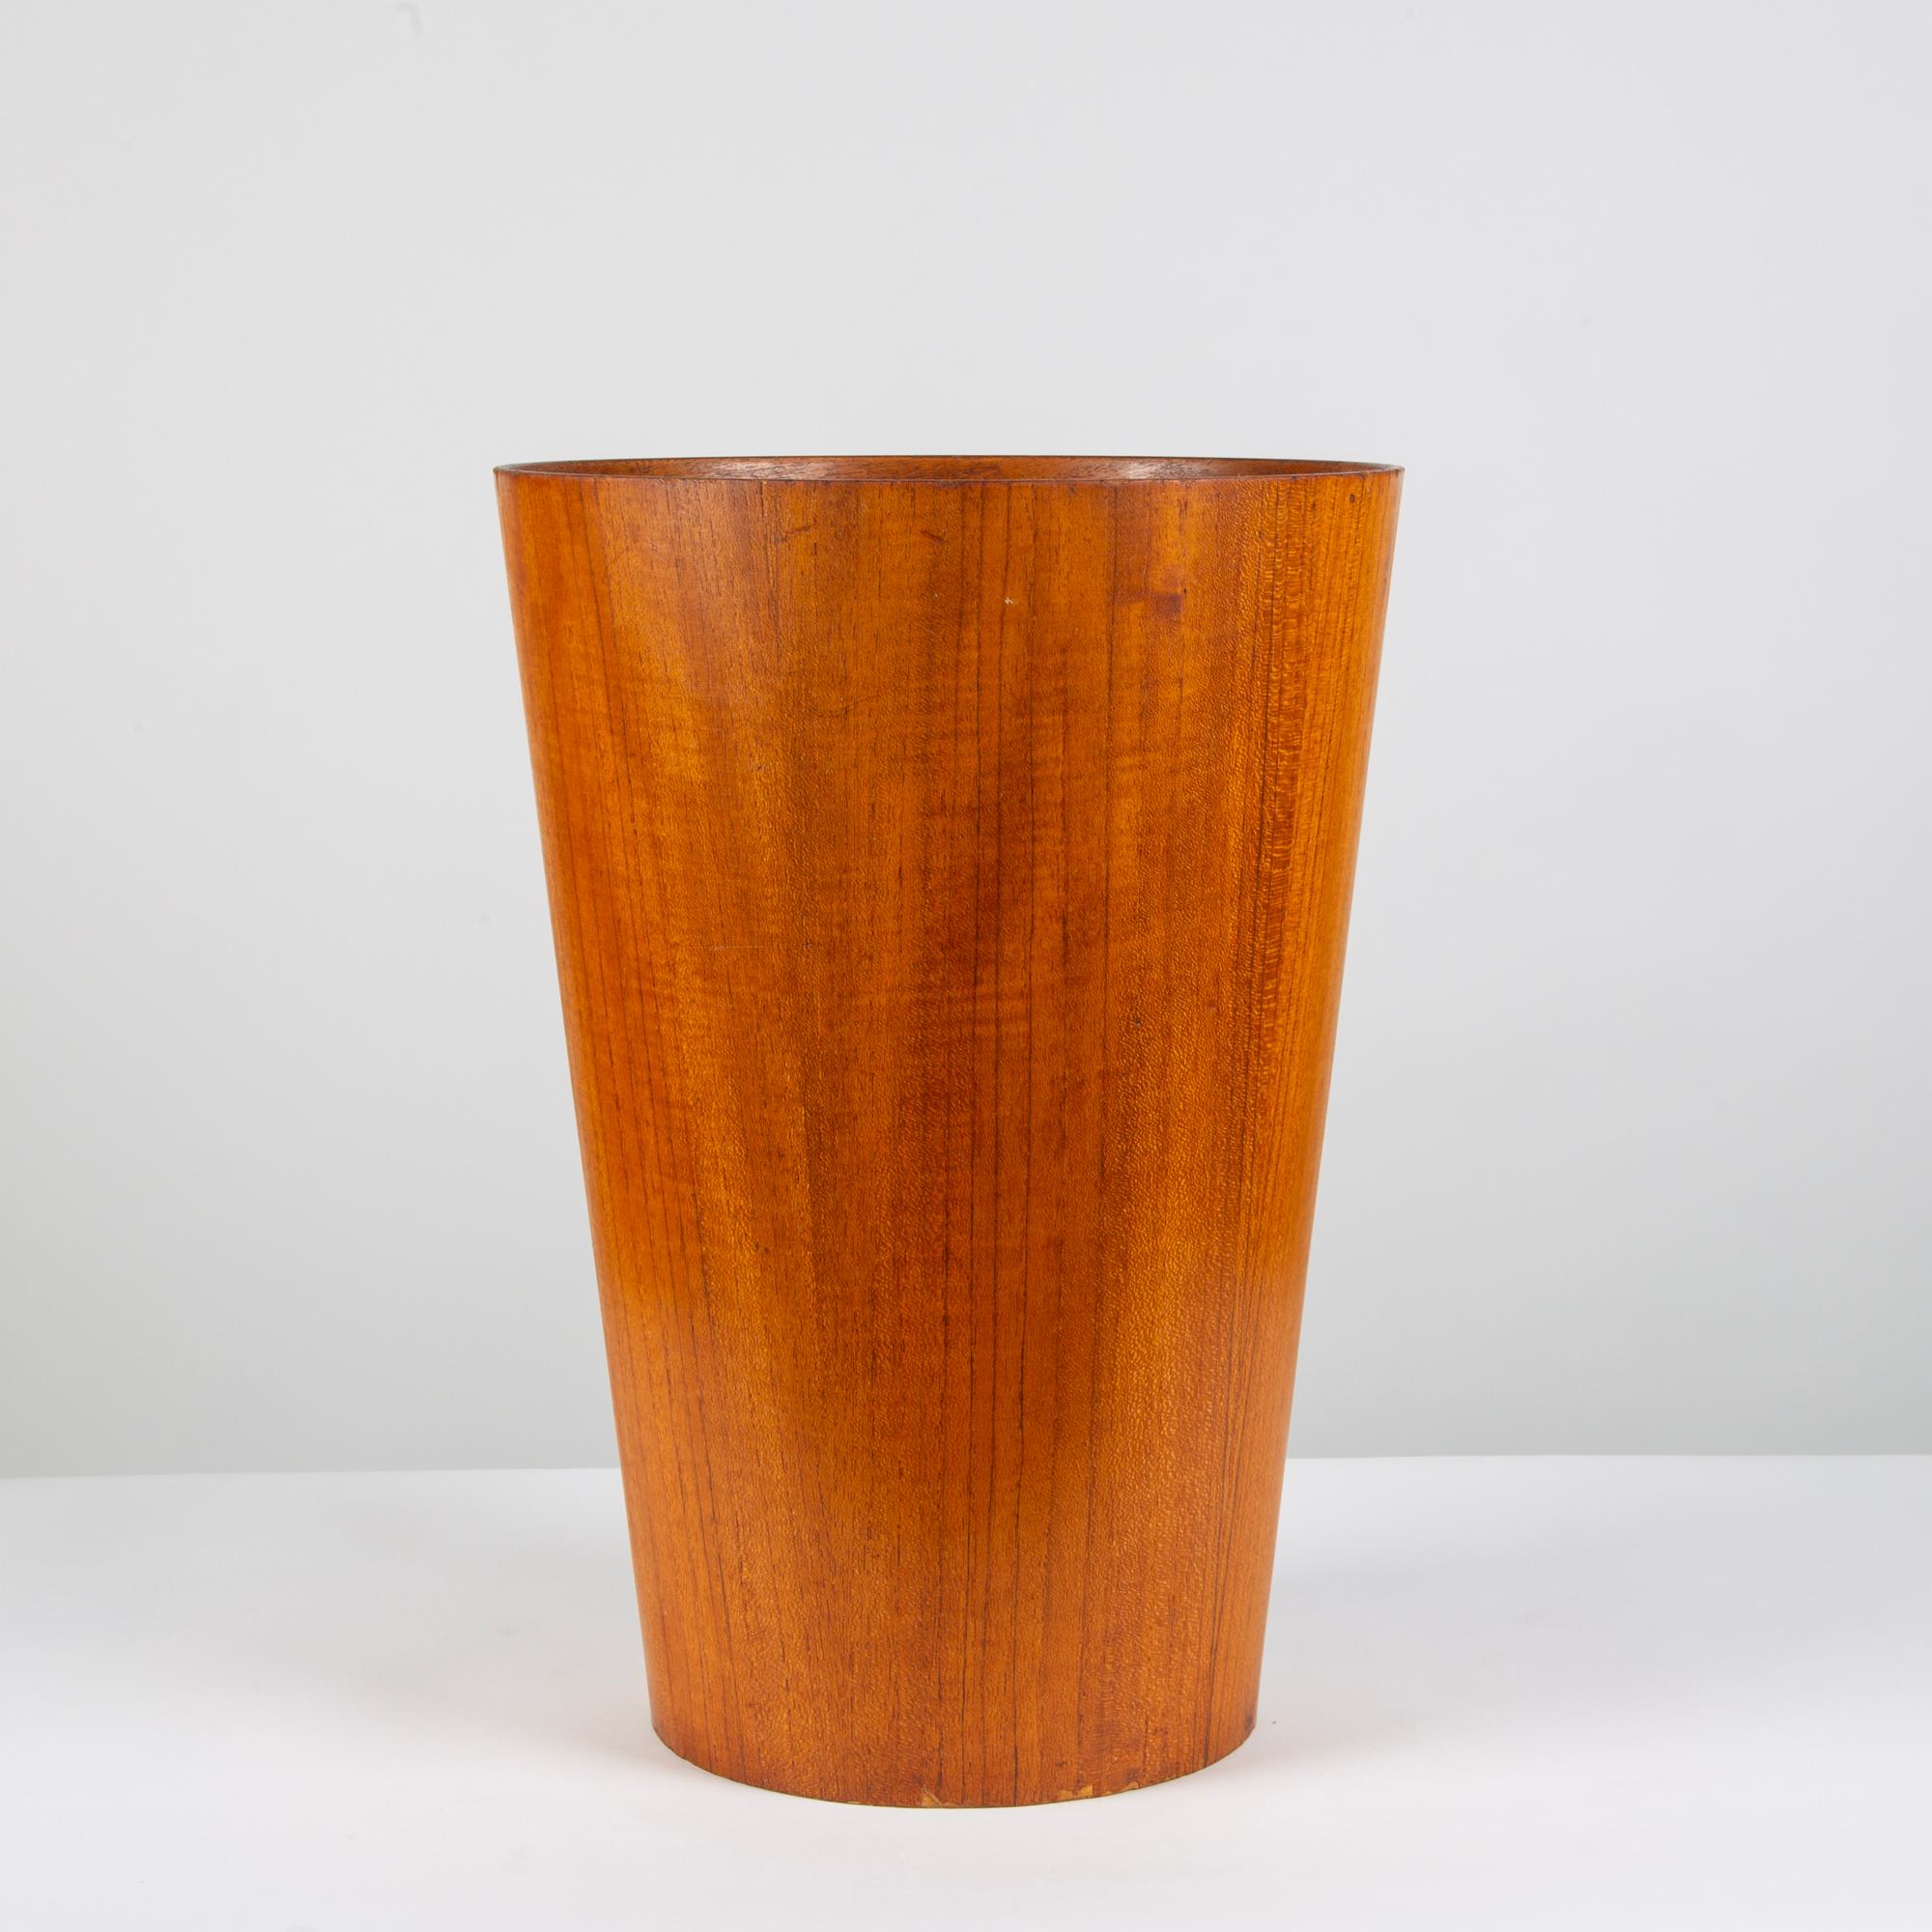 Japanese wastebasket features a thin circular teak and sapele plywood body that tapers towards to the bottom of the bin.

Dimensions: ??11.25